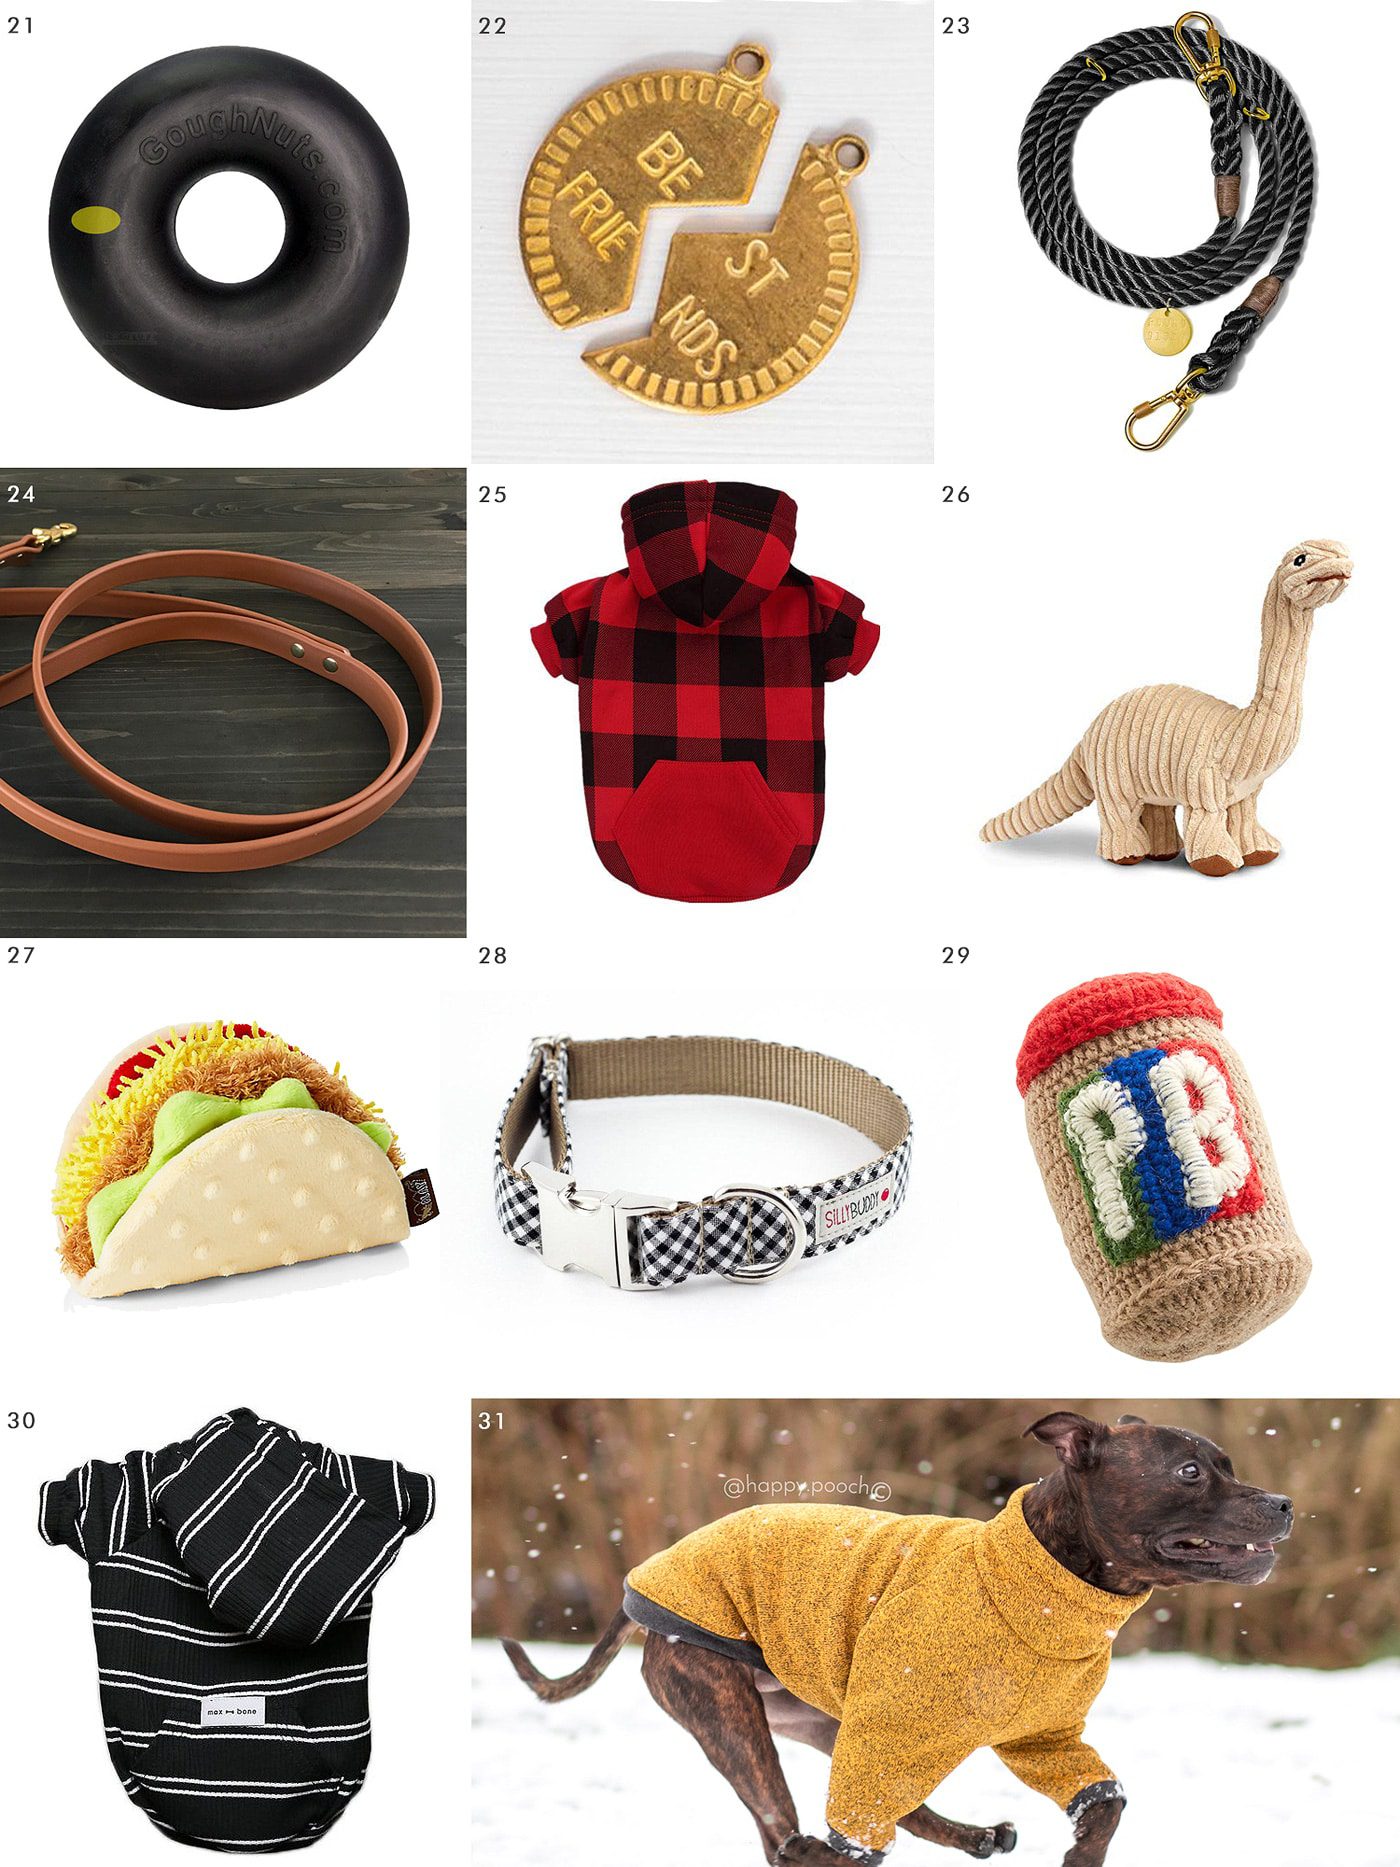 Pet supplies that look great in your home! // Attractive pet products // via Yellow Brick Home